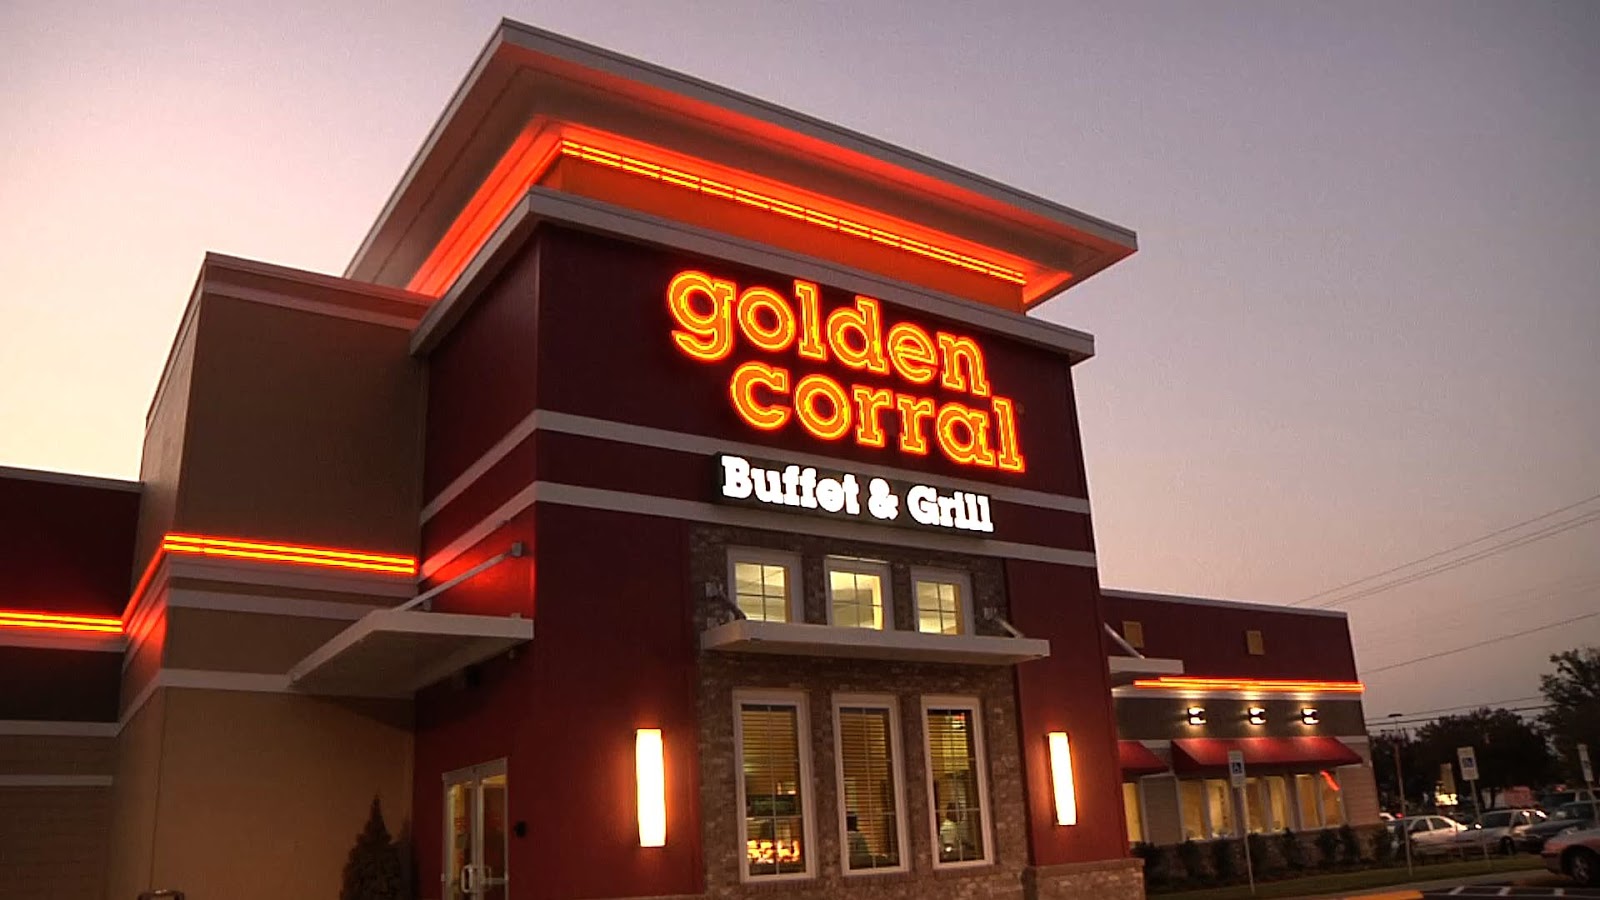 Golden Corral Menu Prices for 2023